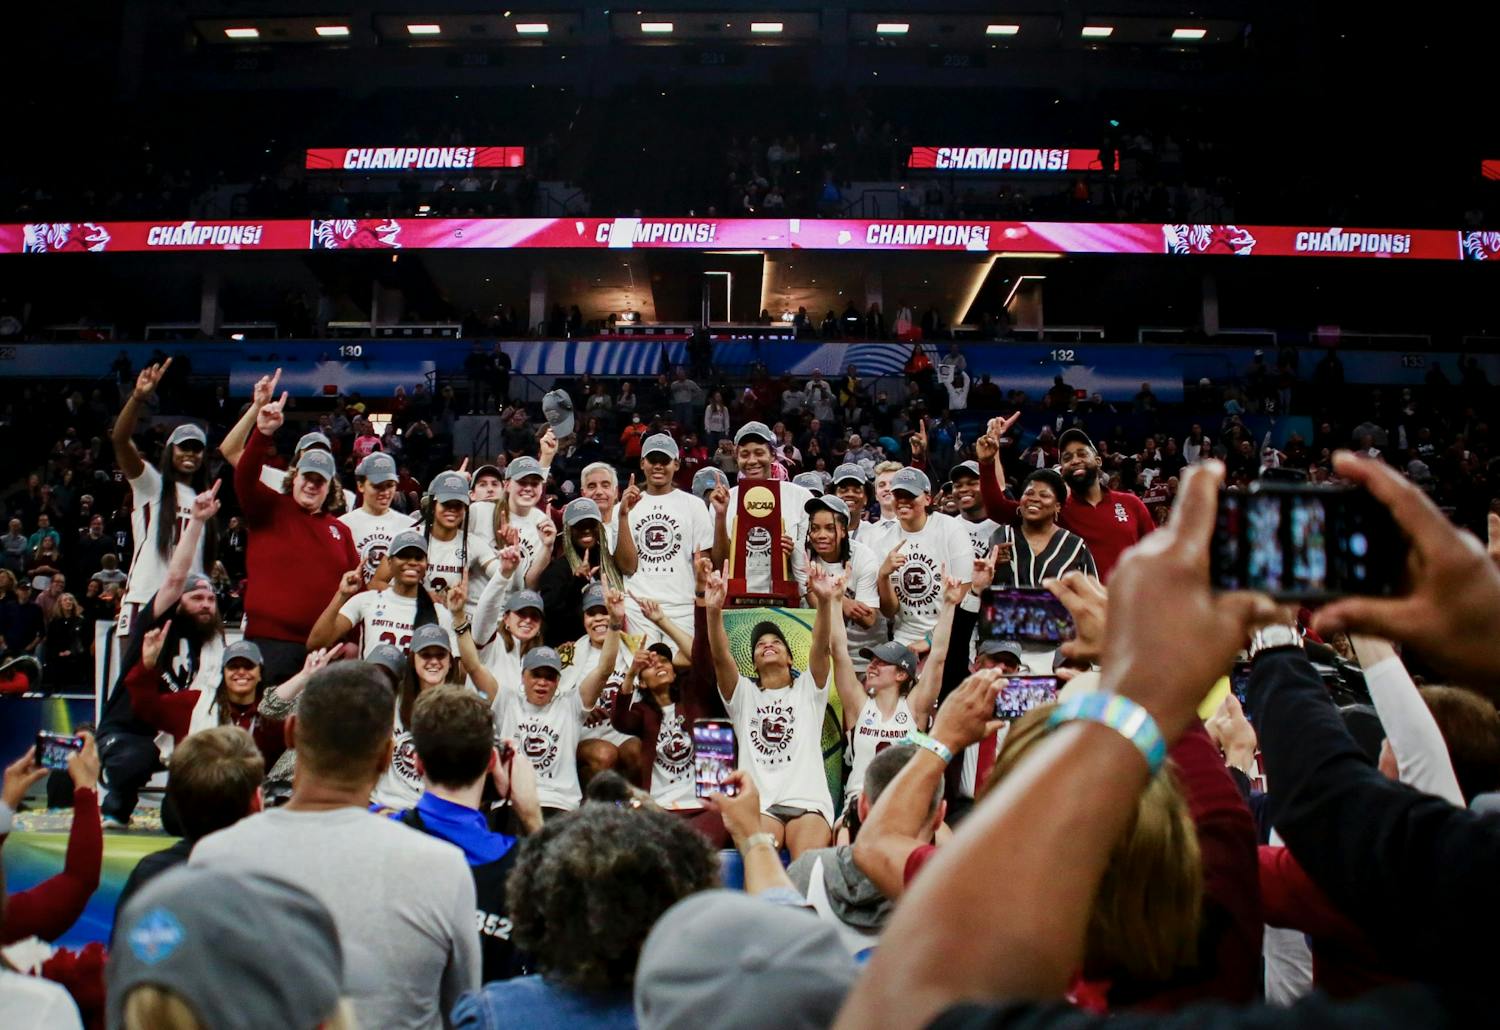 The South Carolina women's basketball team celebrates its national championship win against UConn on April 3, 2022. Since the win, two Gamecocks have announced plans to enter the transfer portal and one transfer guard committed to South Carolina.&nbsp;